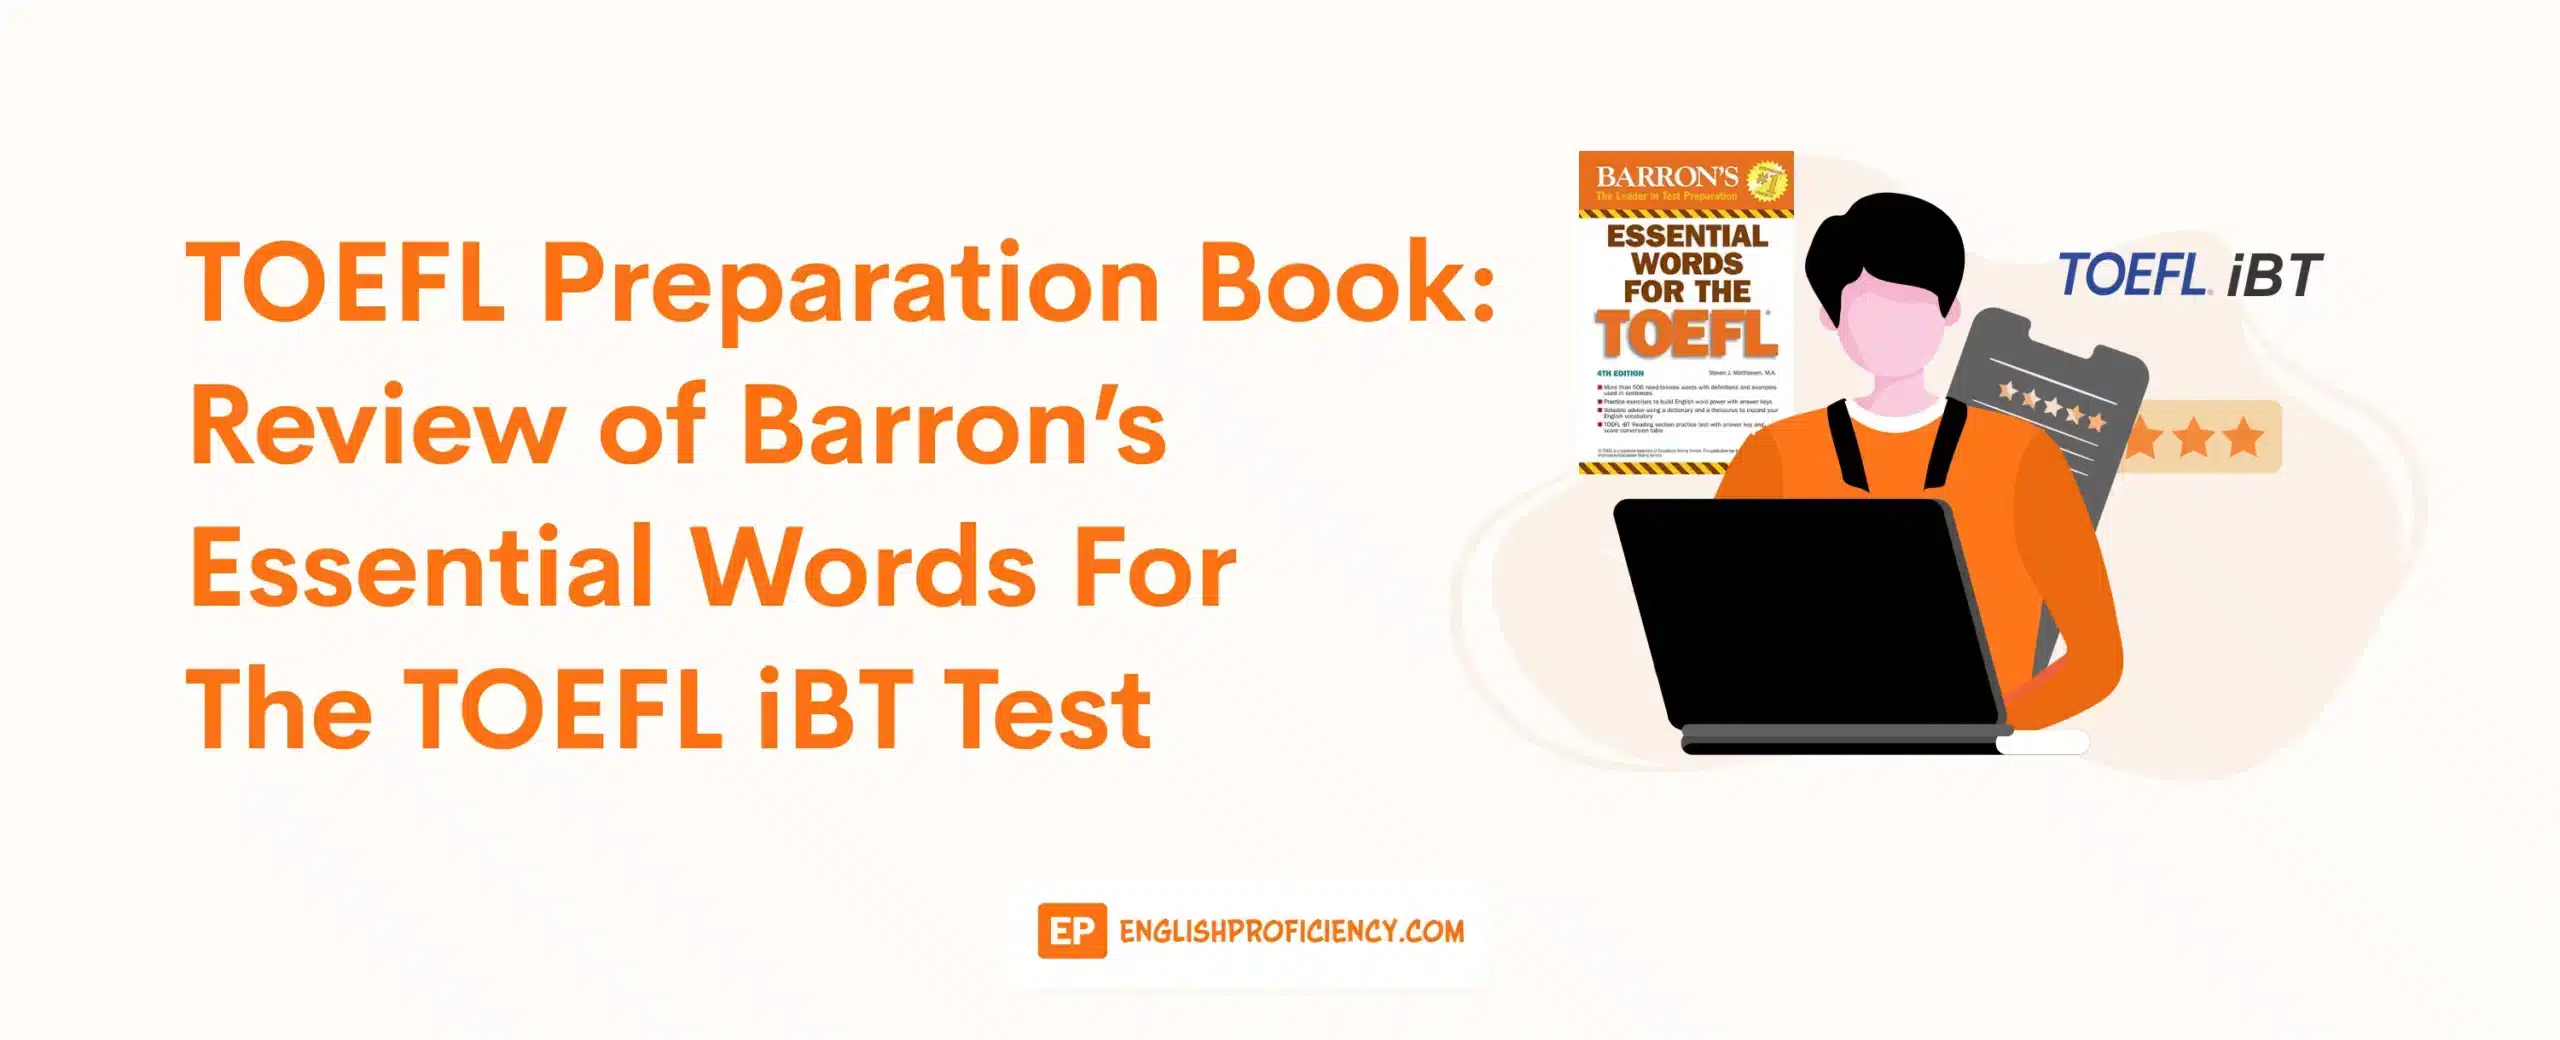 TOEFL Preparation Book Review of Barron’s Essential Words For The TOEFL iBT Test